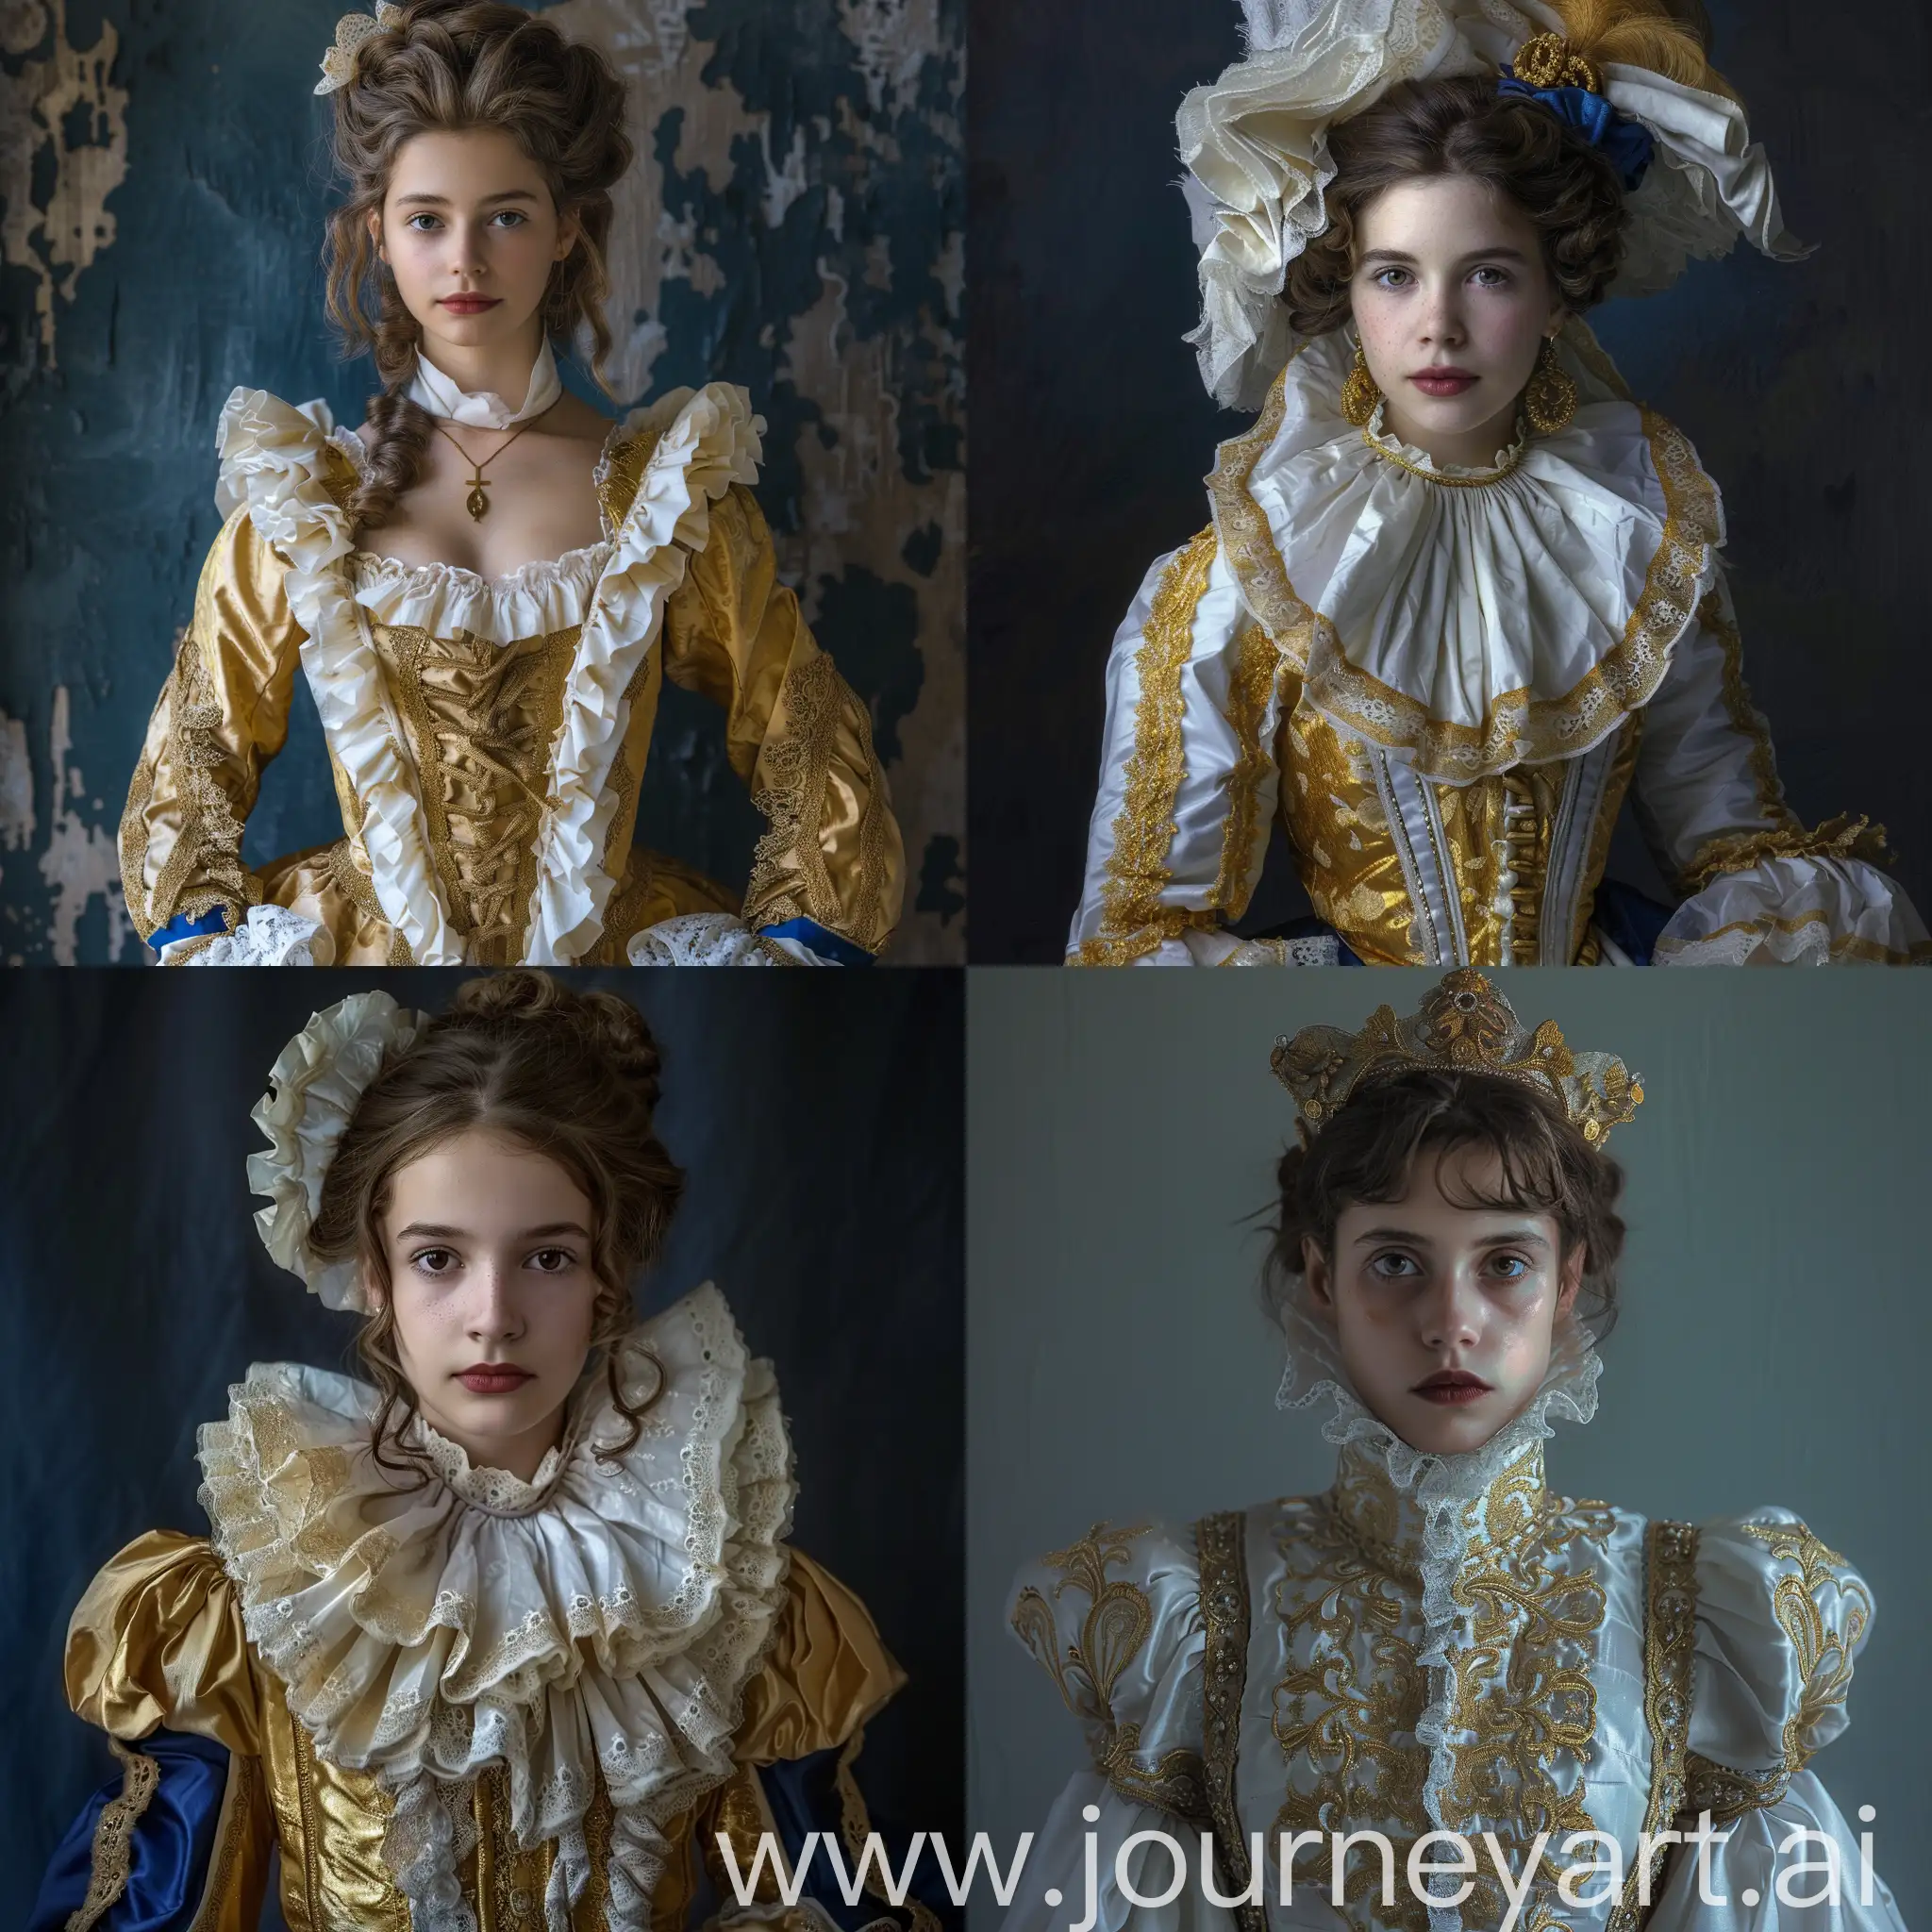  robinson's halloween reimagined as a young woman in gold and white costume, in the style of rococo portraitures, elina karimova, authentic details, dark blue and light blue, uhd image, vicente romero redondo, exquisite detail